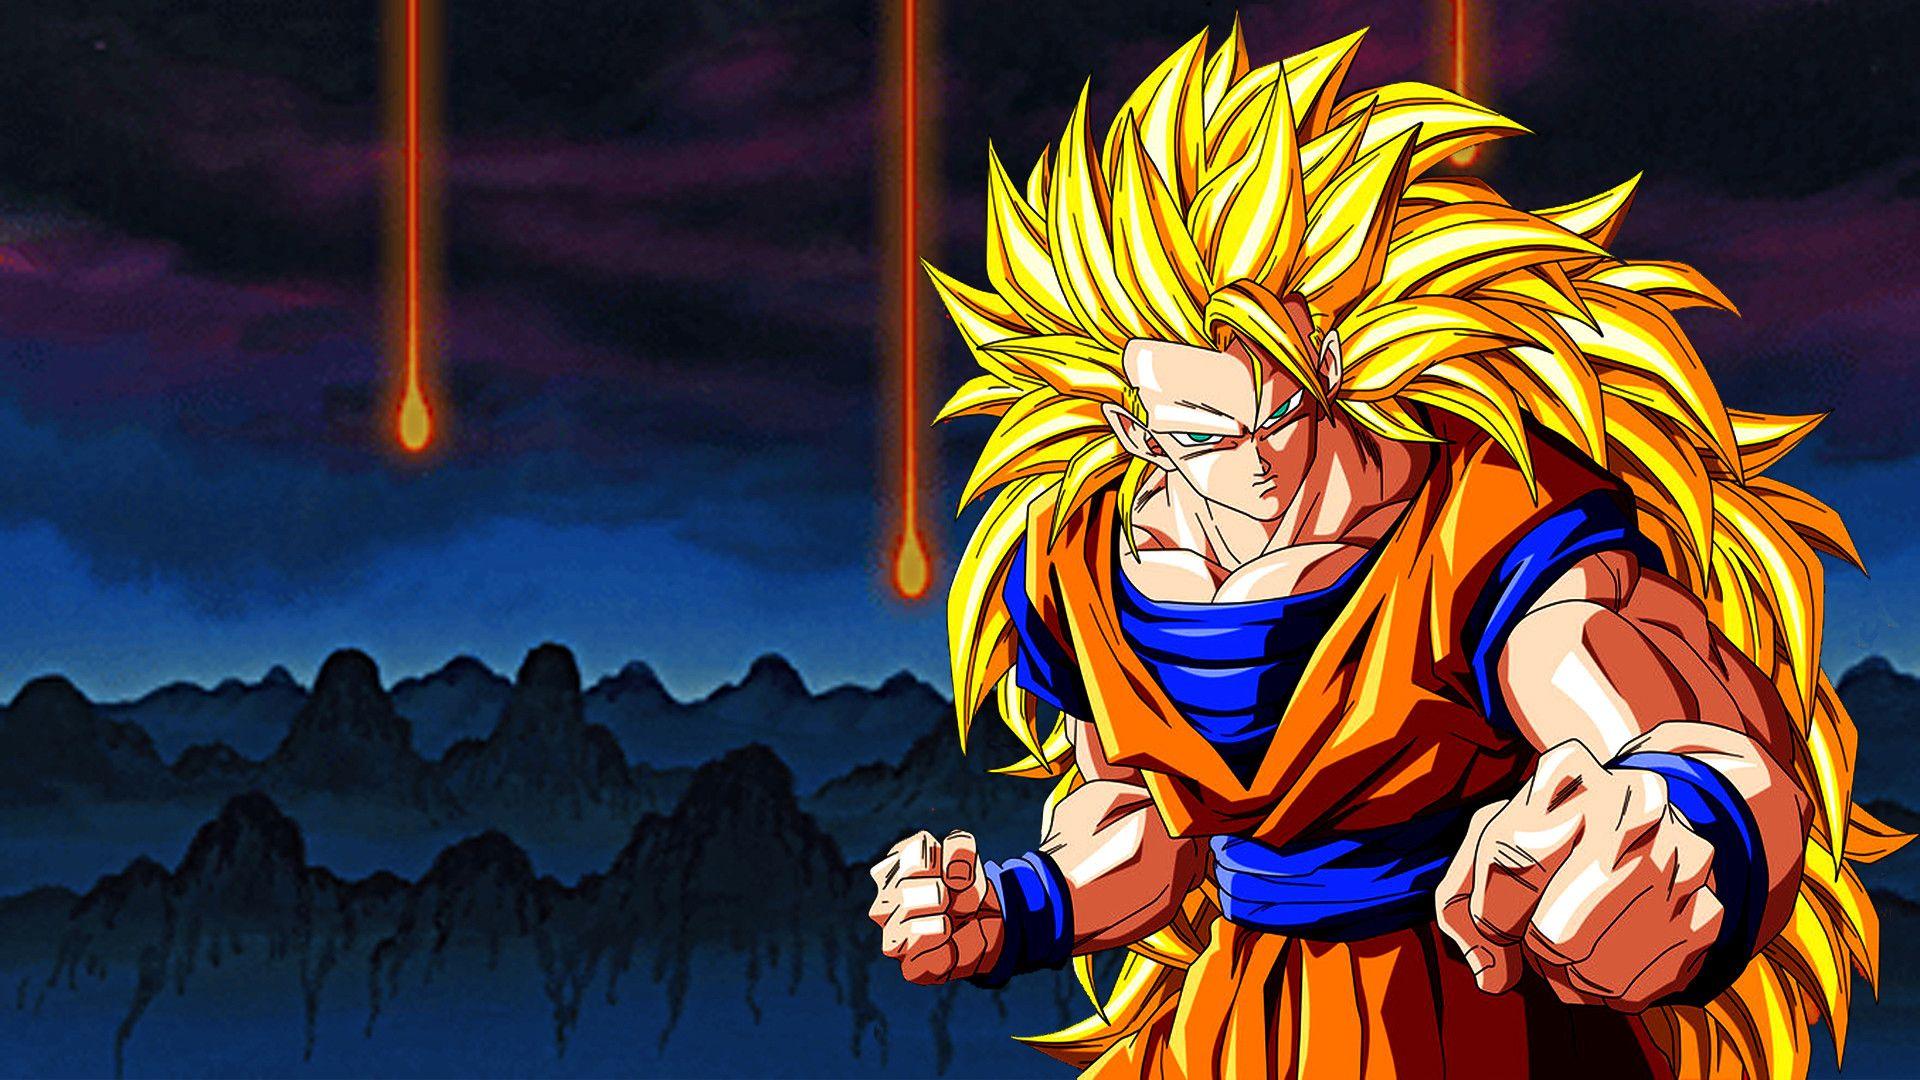 Tons of awesome goku super saiyan 5 wallpapers HD to download for free. 